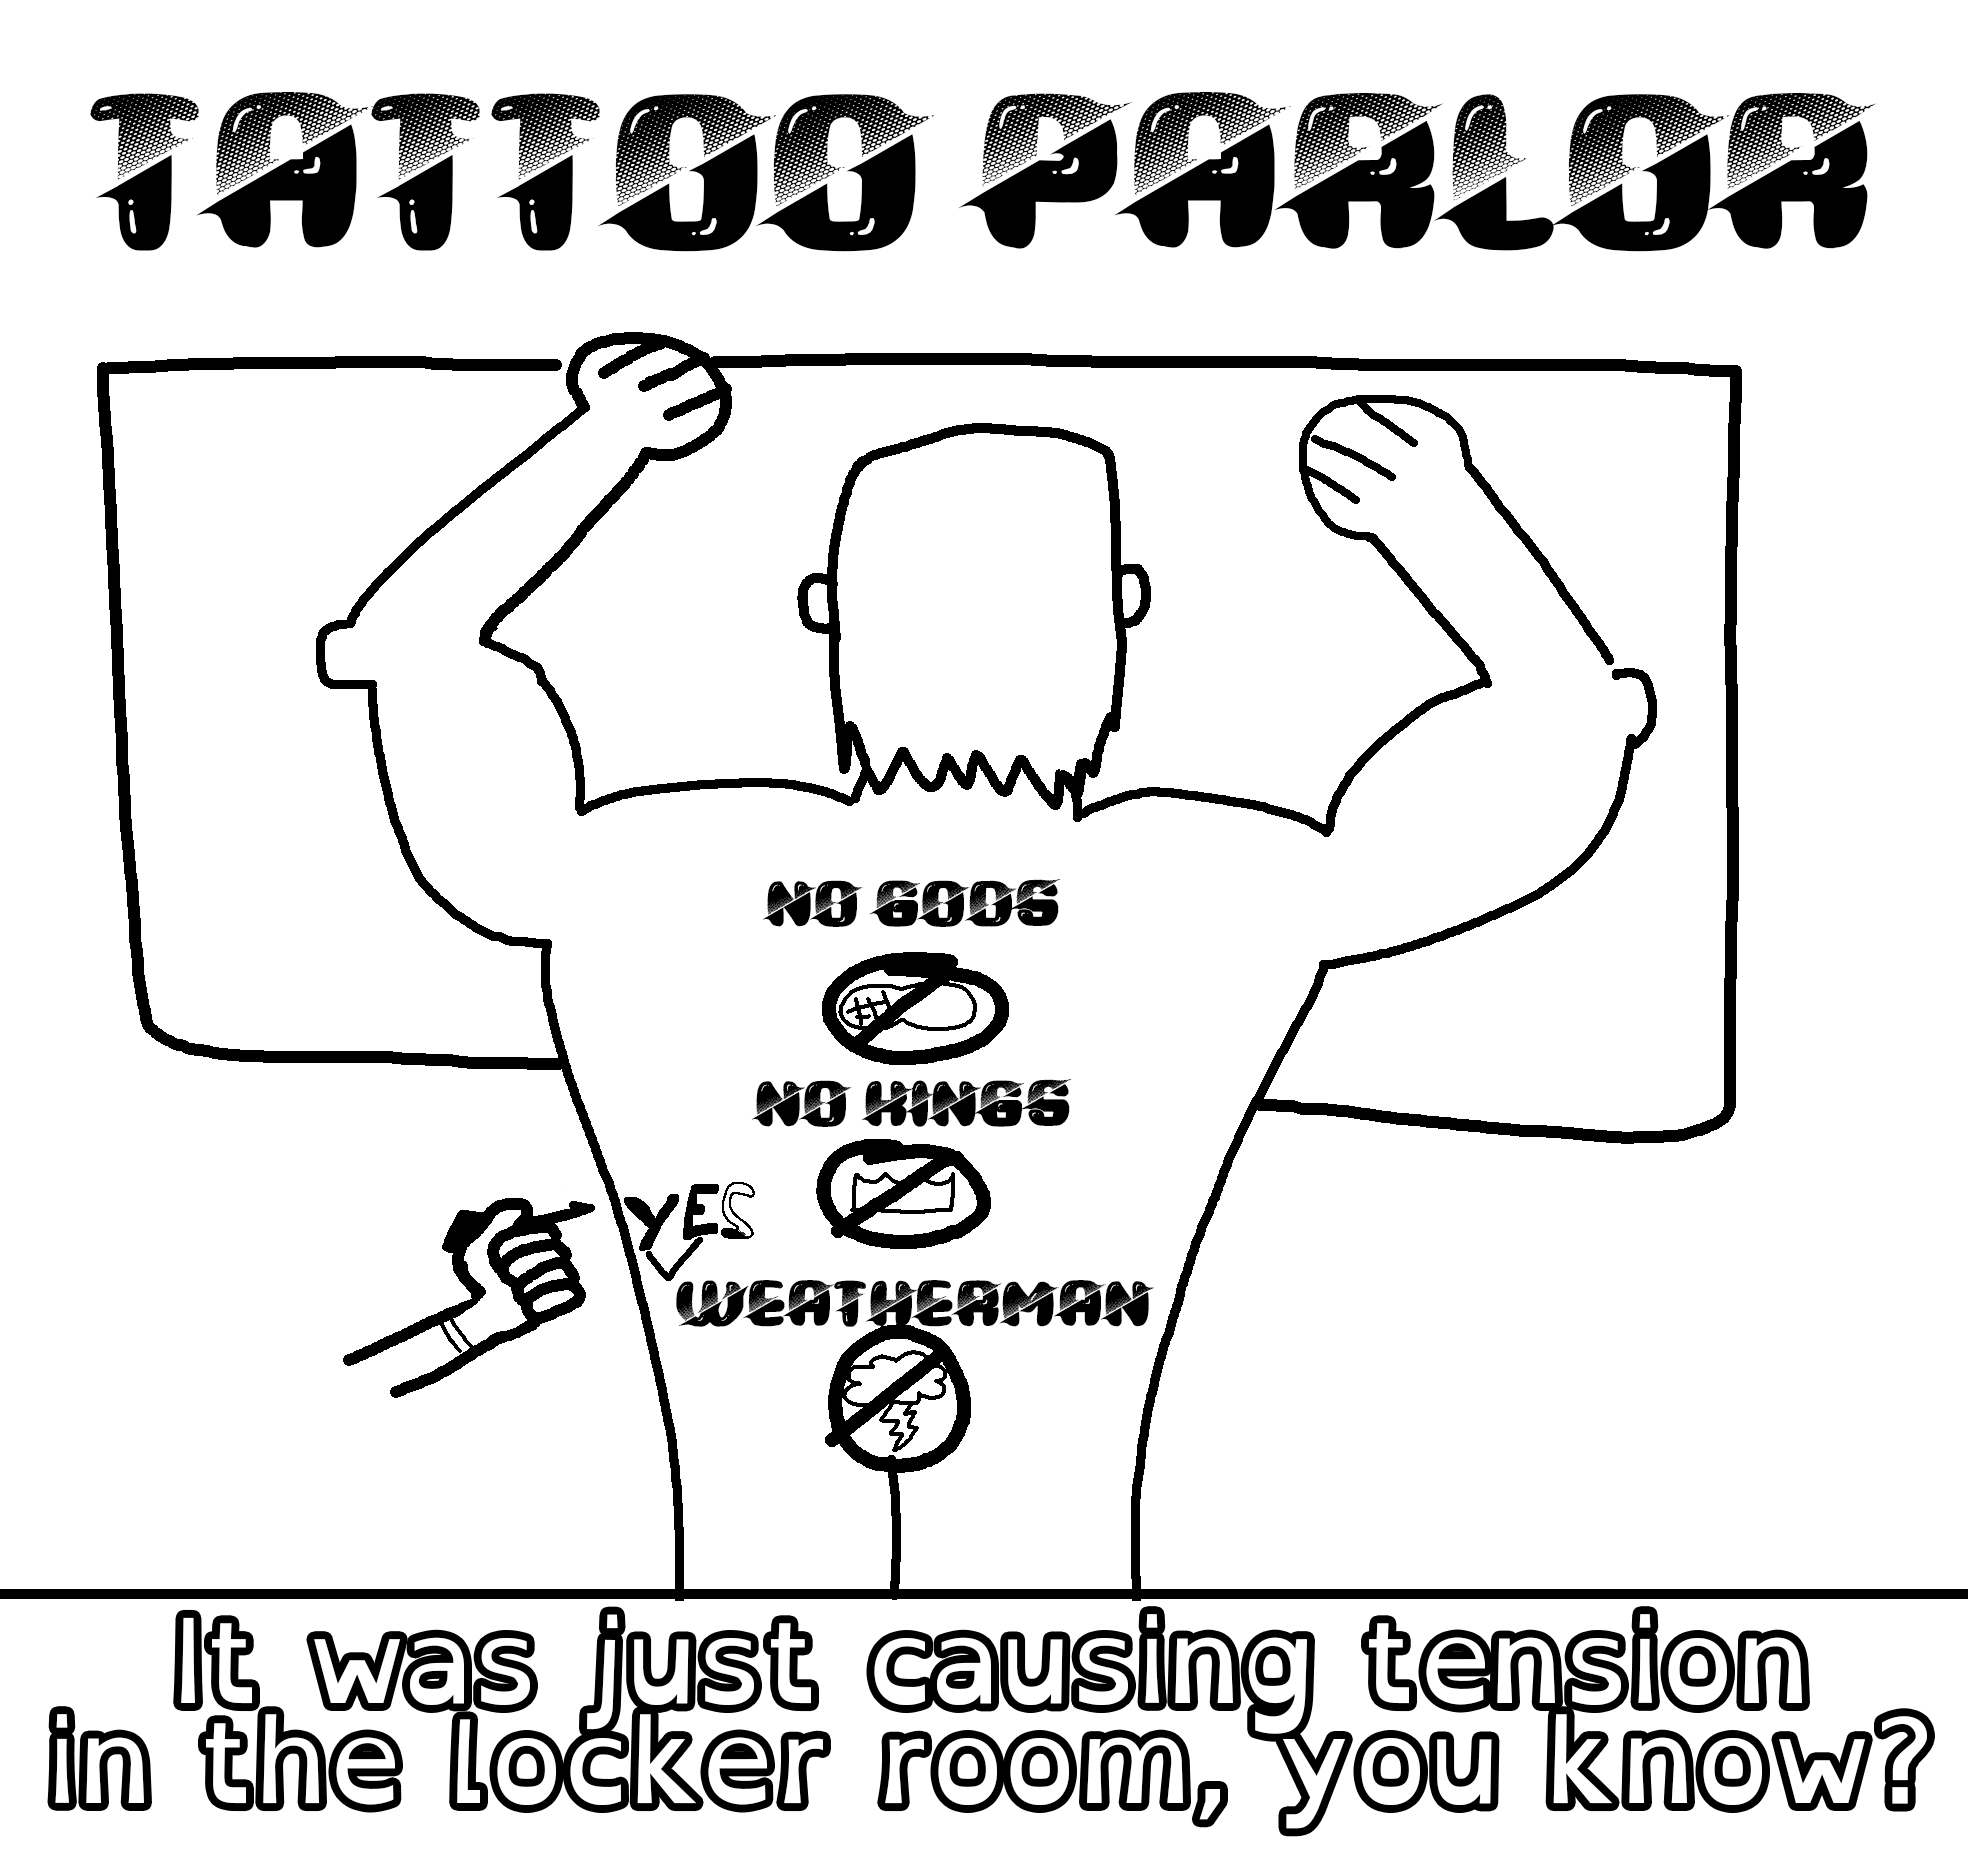 A man's back is tattooed with "No Gods No Kings Weatherman" A tattoo gun is poorly adding "Yes" between King and Weatherman. The caption says, "It was jsut causing tension in the locker room, you know?"